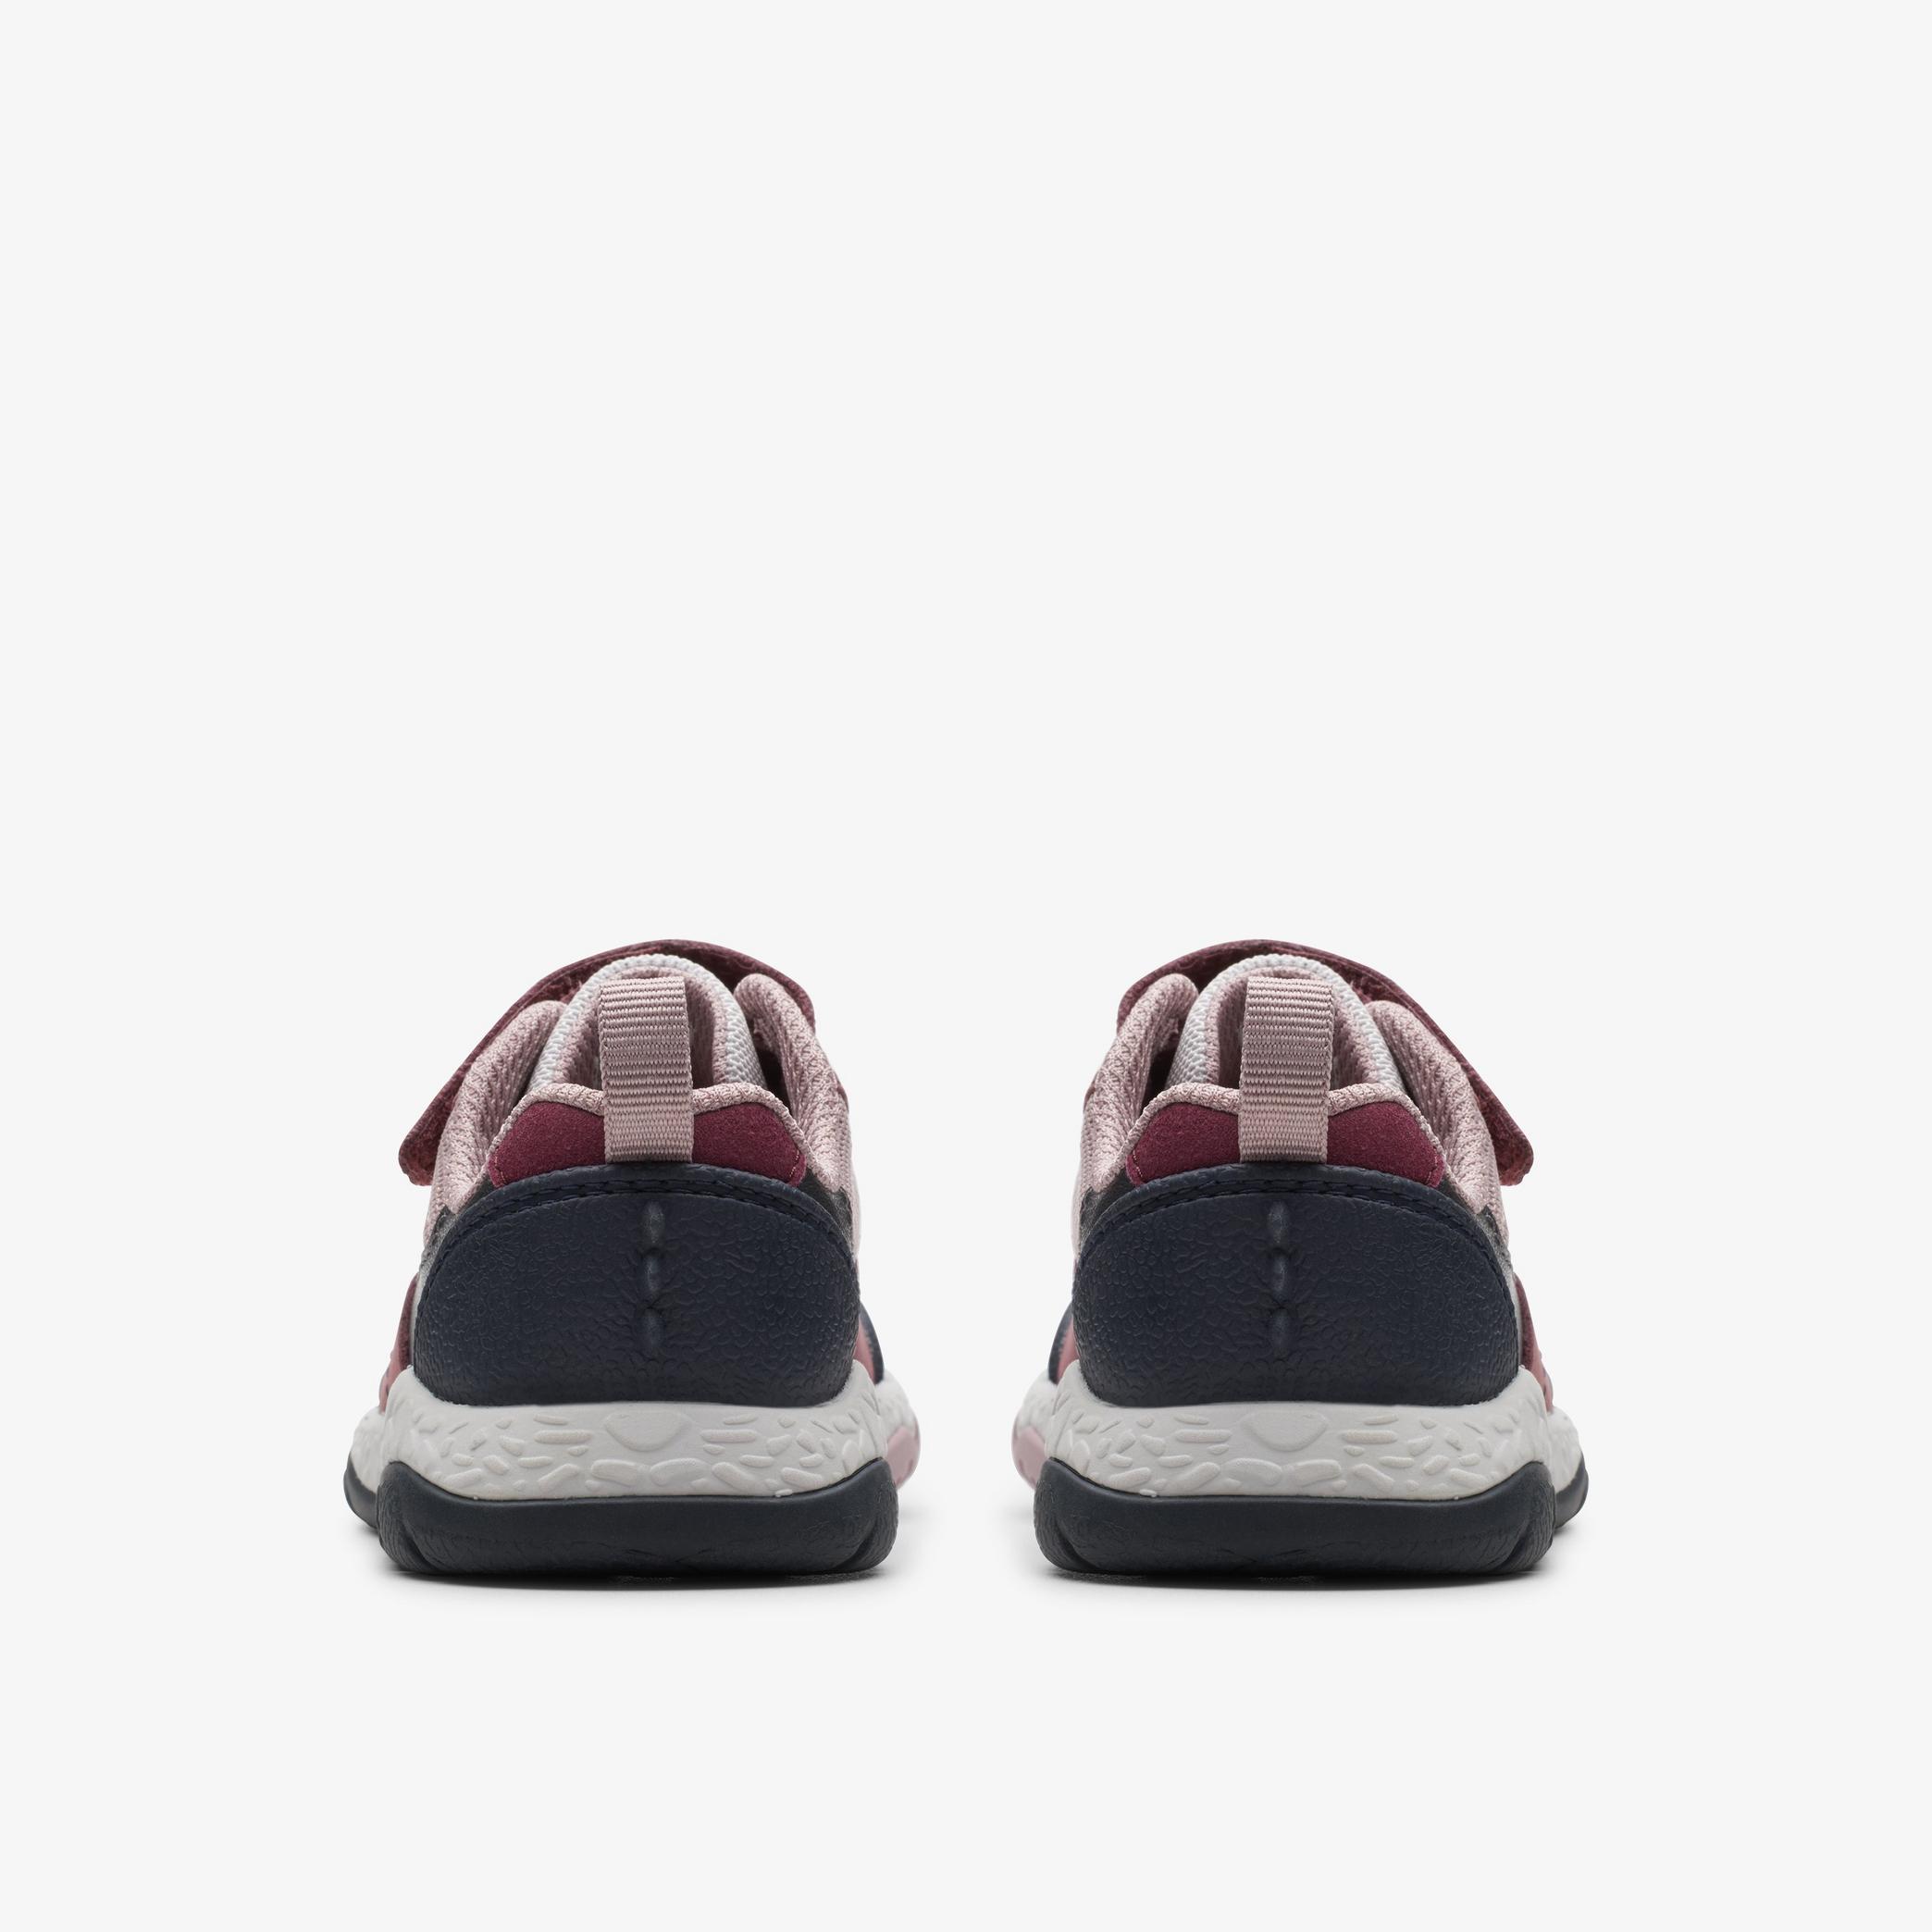 GIRLS Steggy Stride Toddler Berry Leather Shoes | Clarks UK